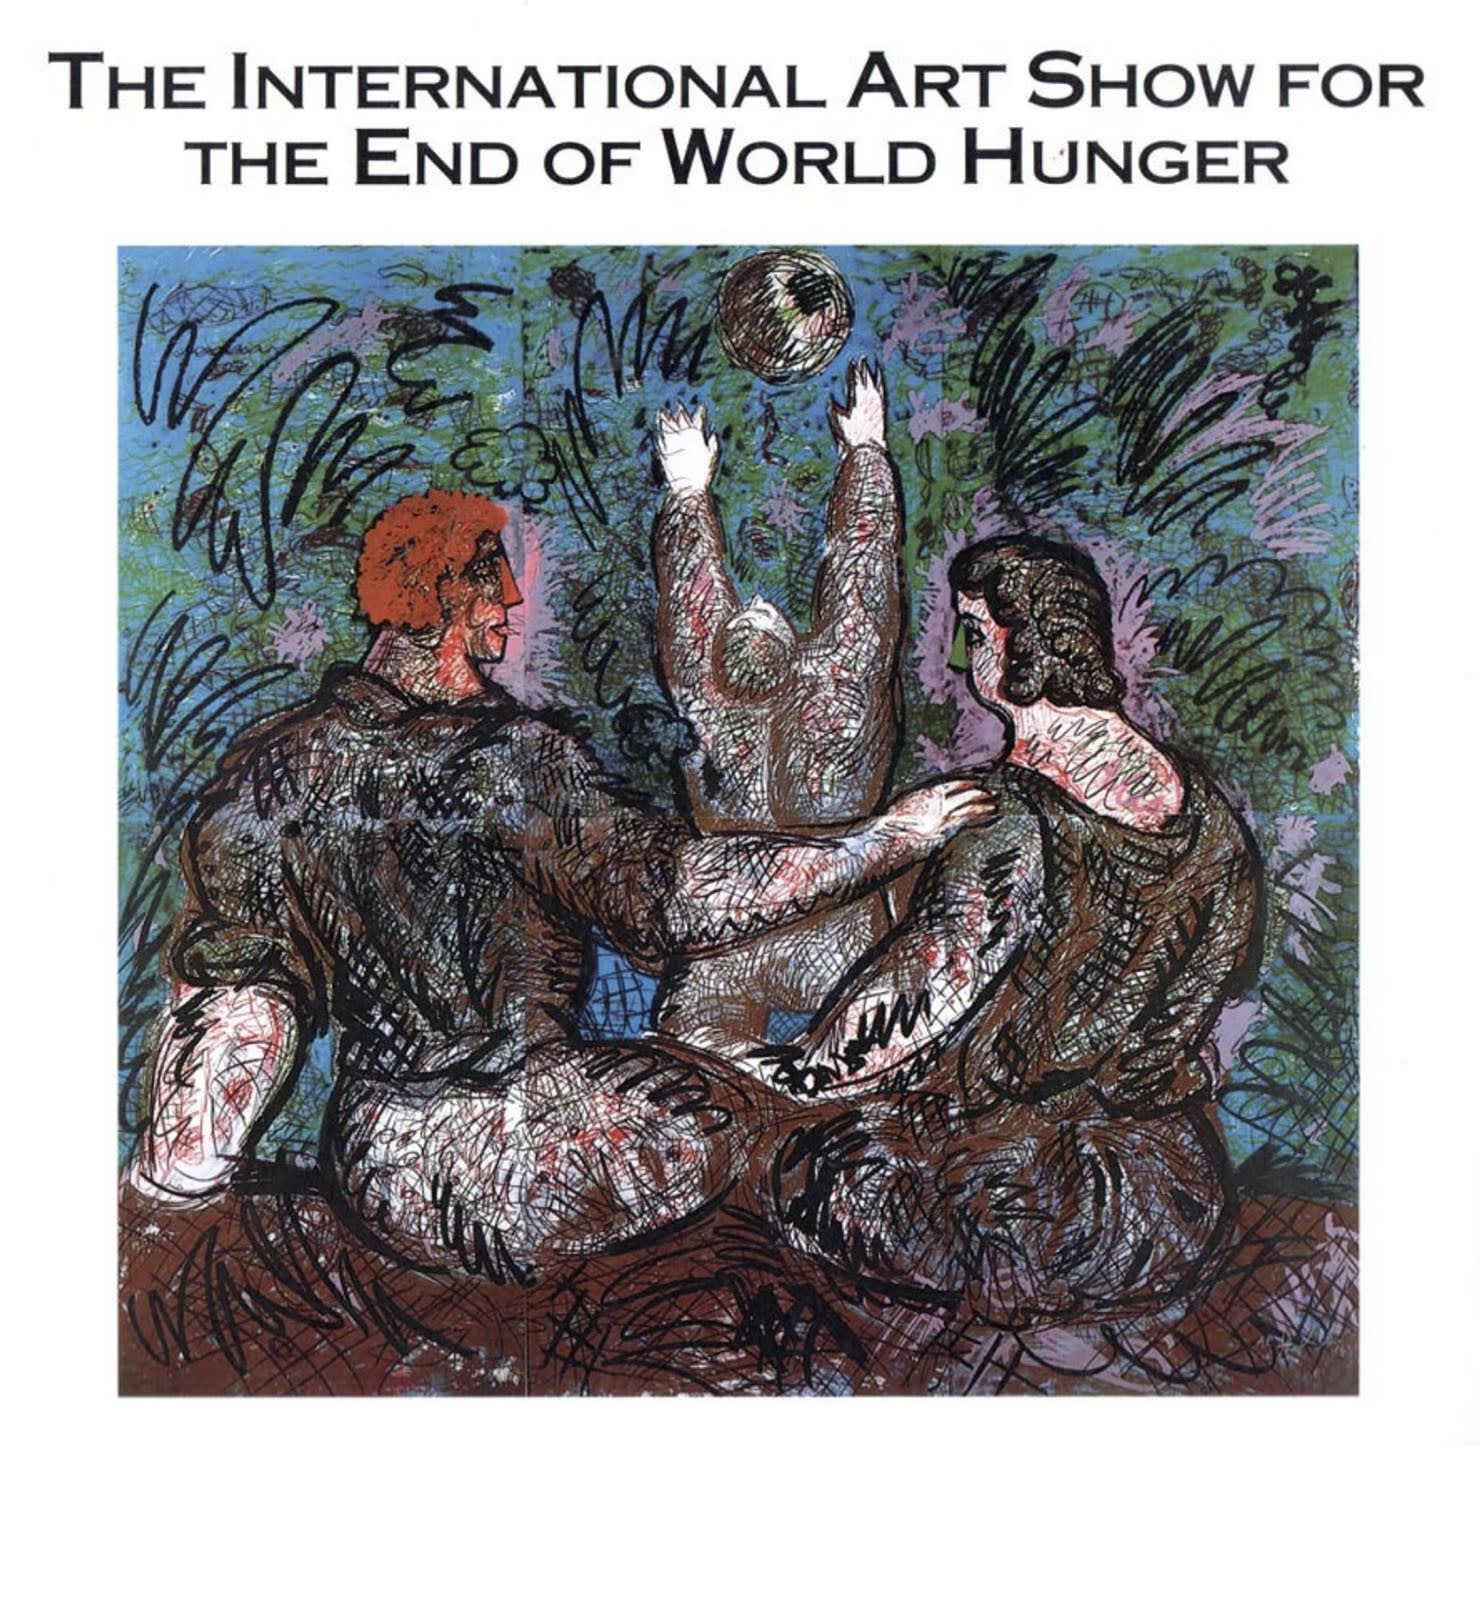 The International Art Show for the End of World Hunger